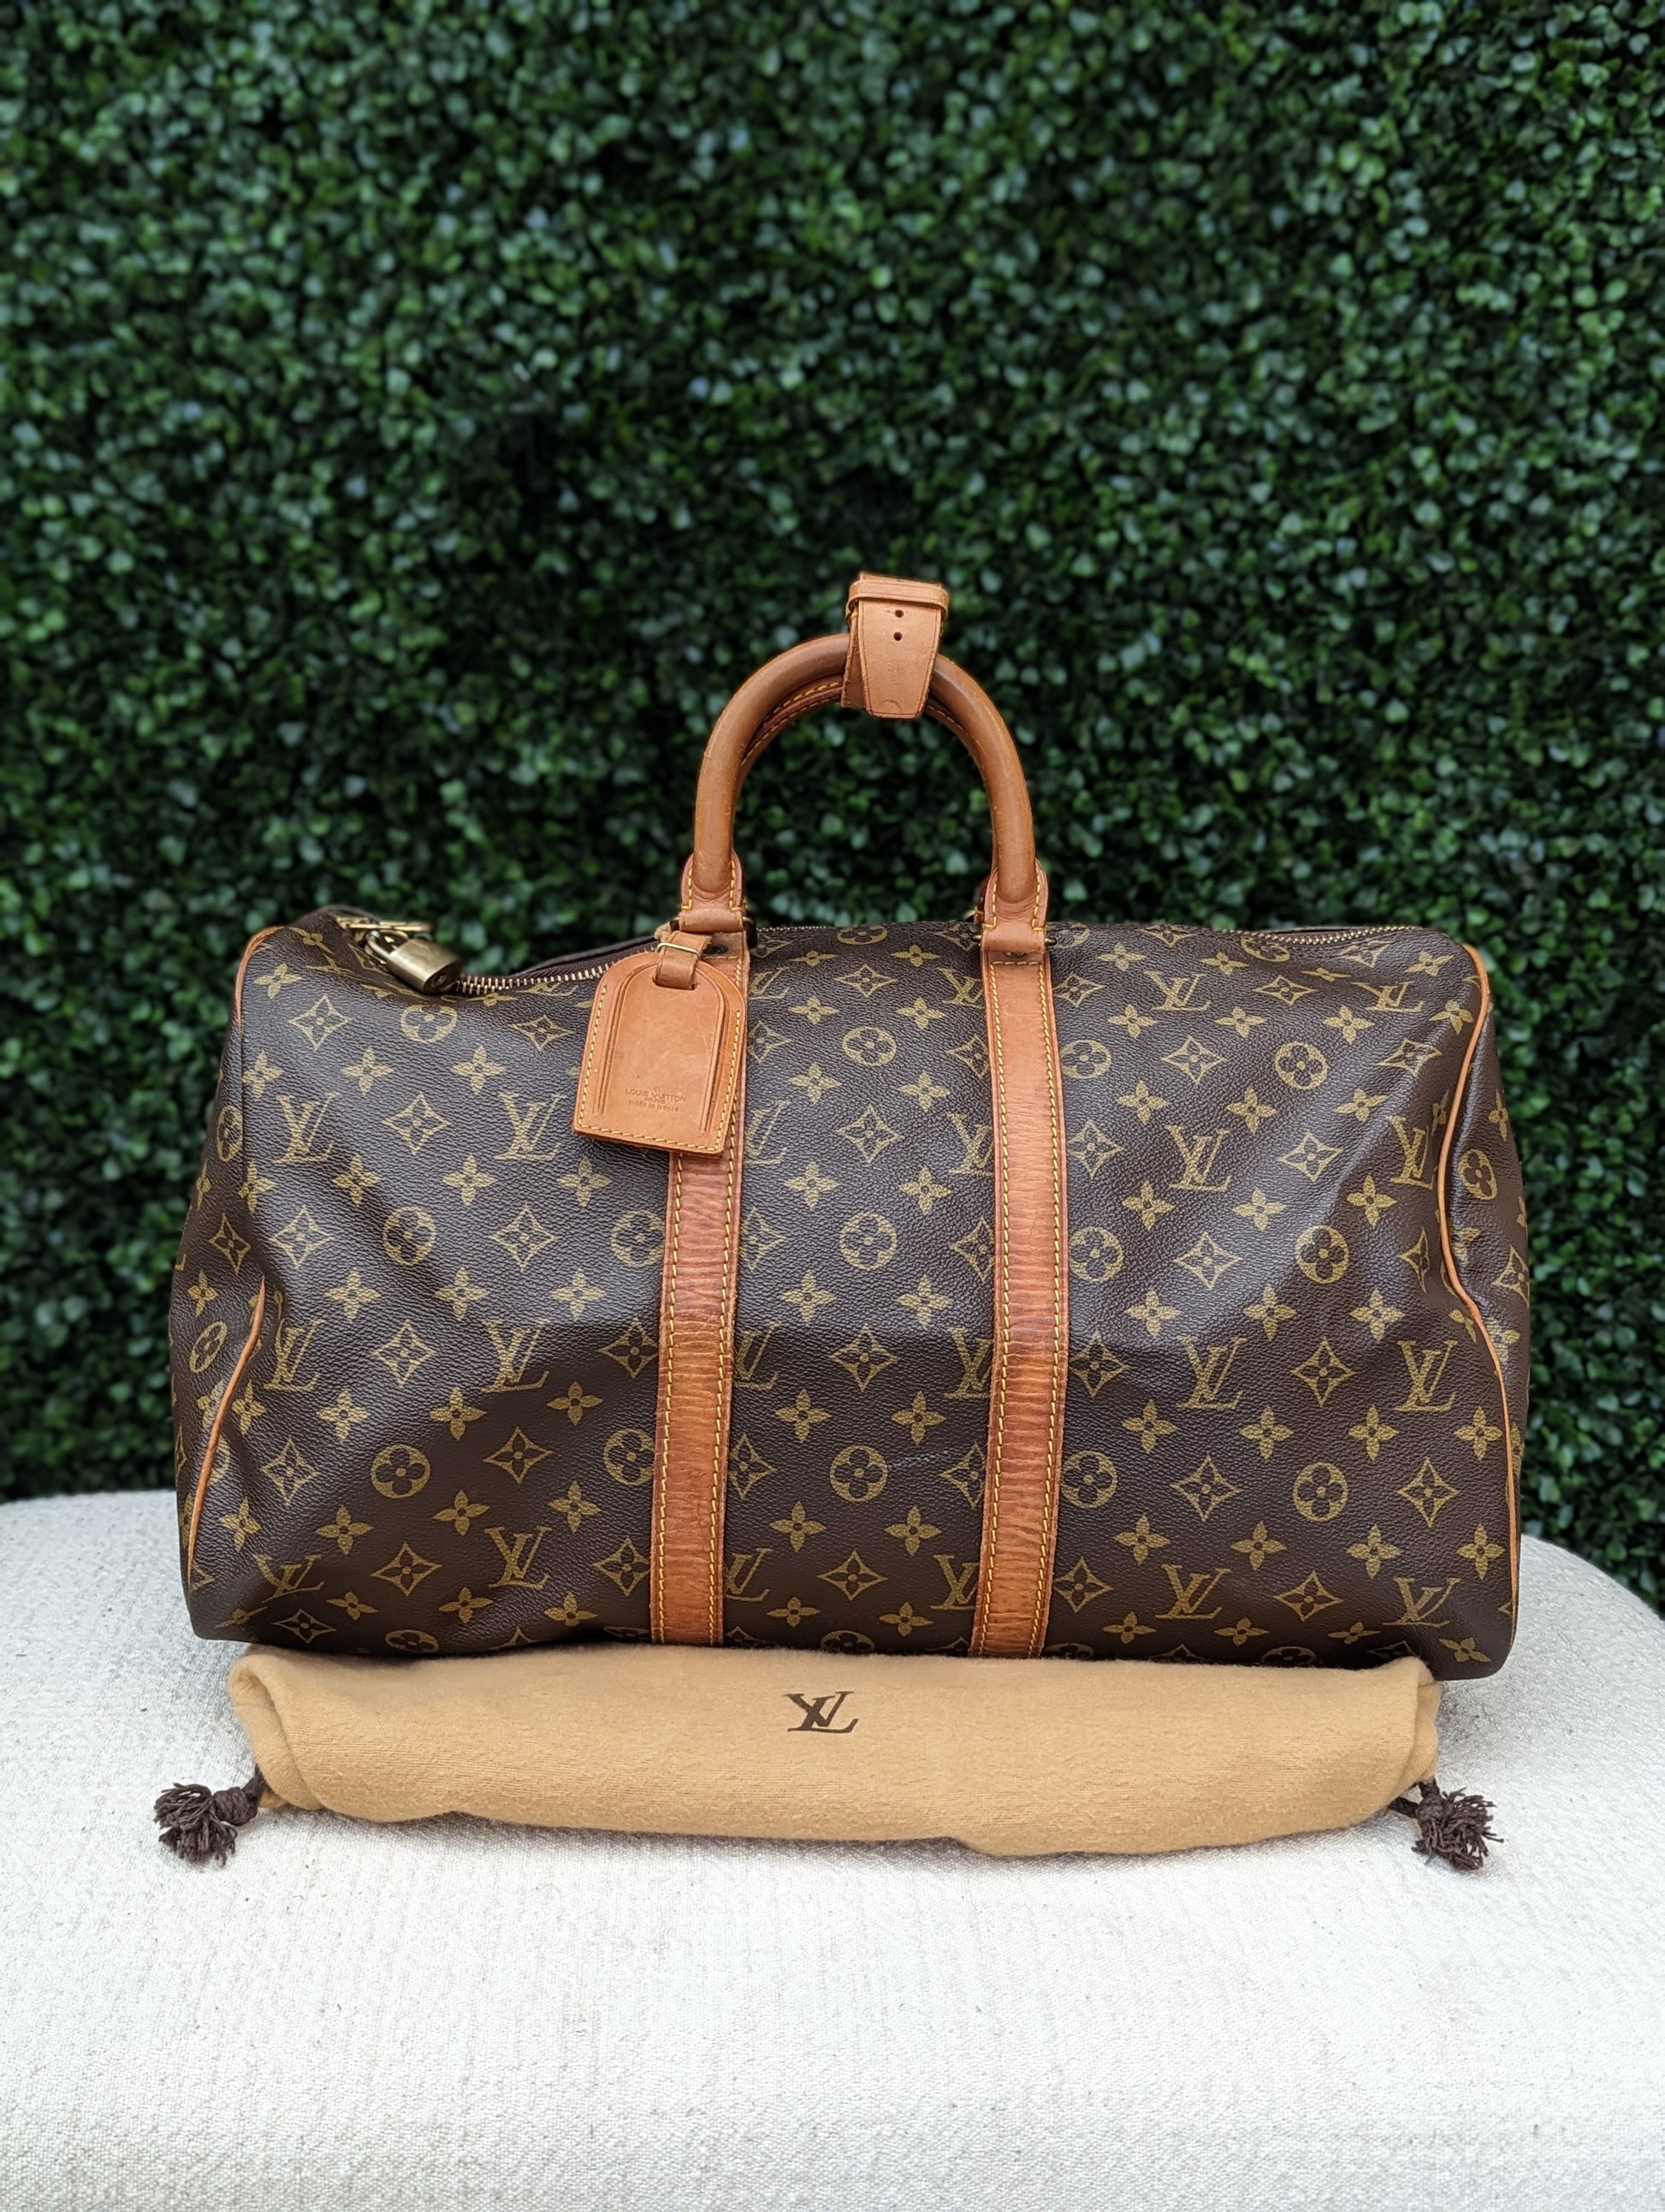 Buy Preowned Luxury Louis Vuitton Keepall Bandouliere 45 Bag at